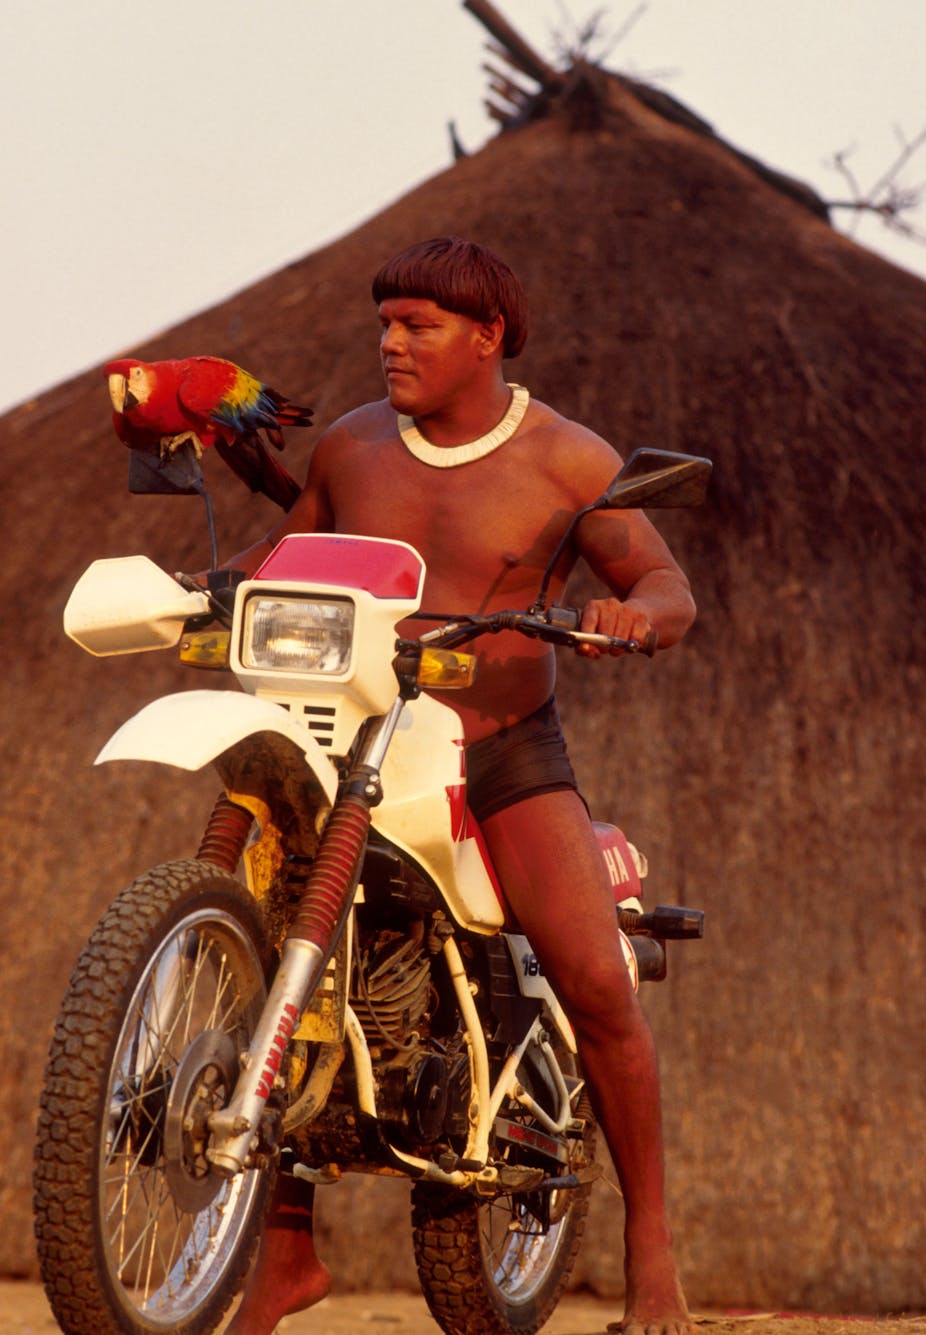 Indigenous man on motorbike with parrot.